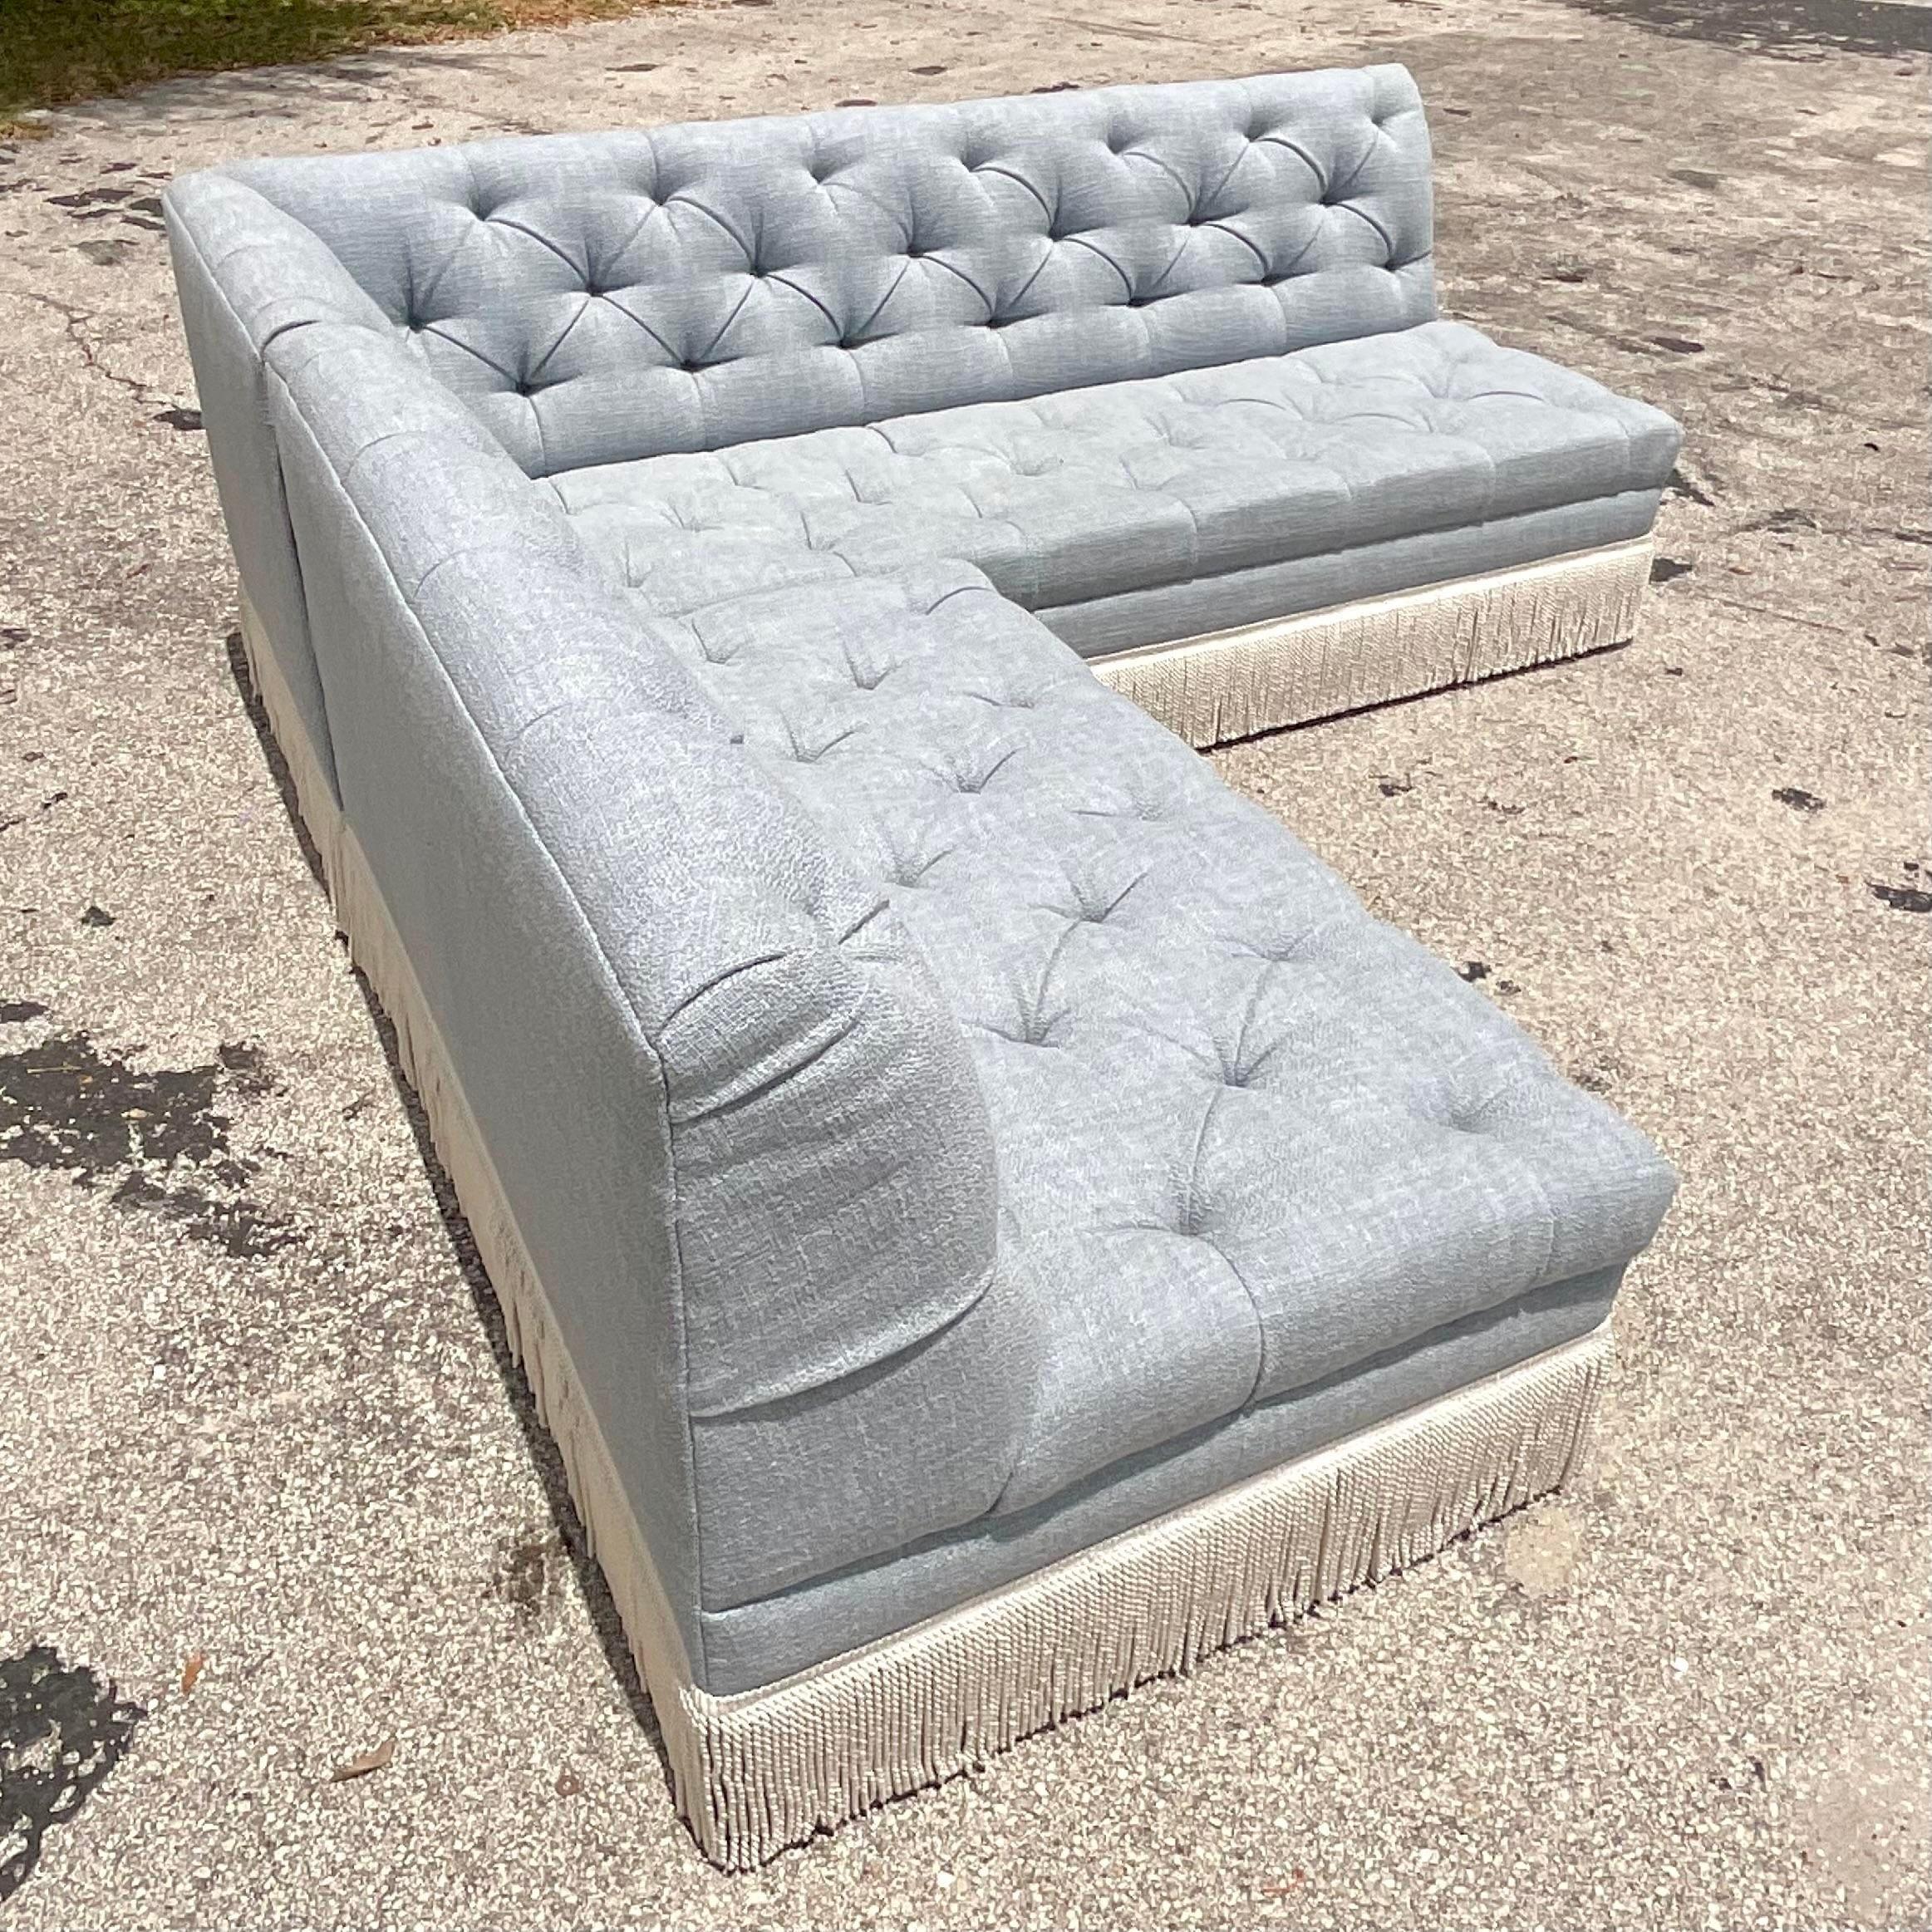 A fantastic vintage Boho sectional sofa. Custom built by the iconic OHenry group. A chic banquette sectional design in a pale blue boucle. A gorgeous heavy twist fringe along the bottom. Acquired from a Palm Beach estate.

The sofa is the same 92